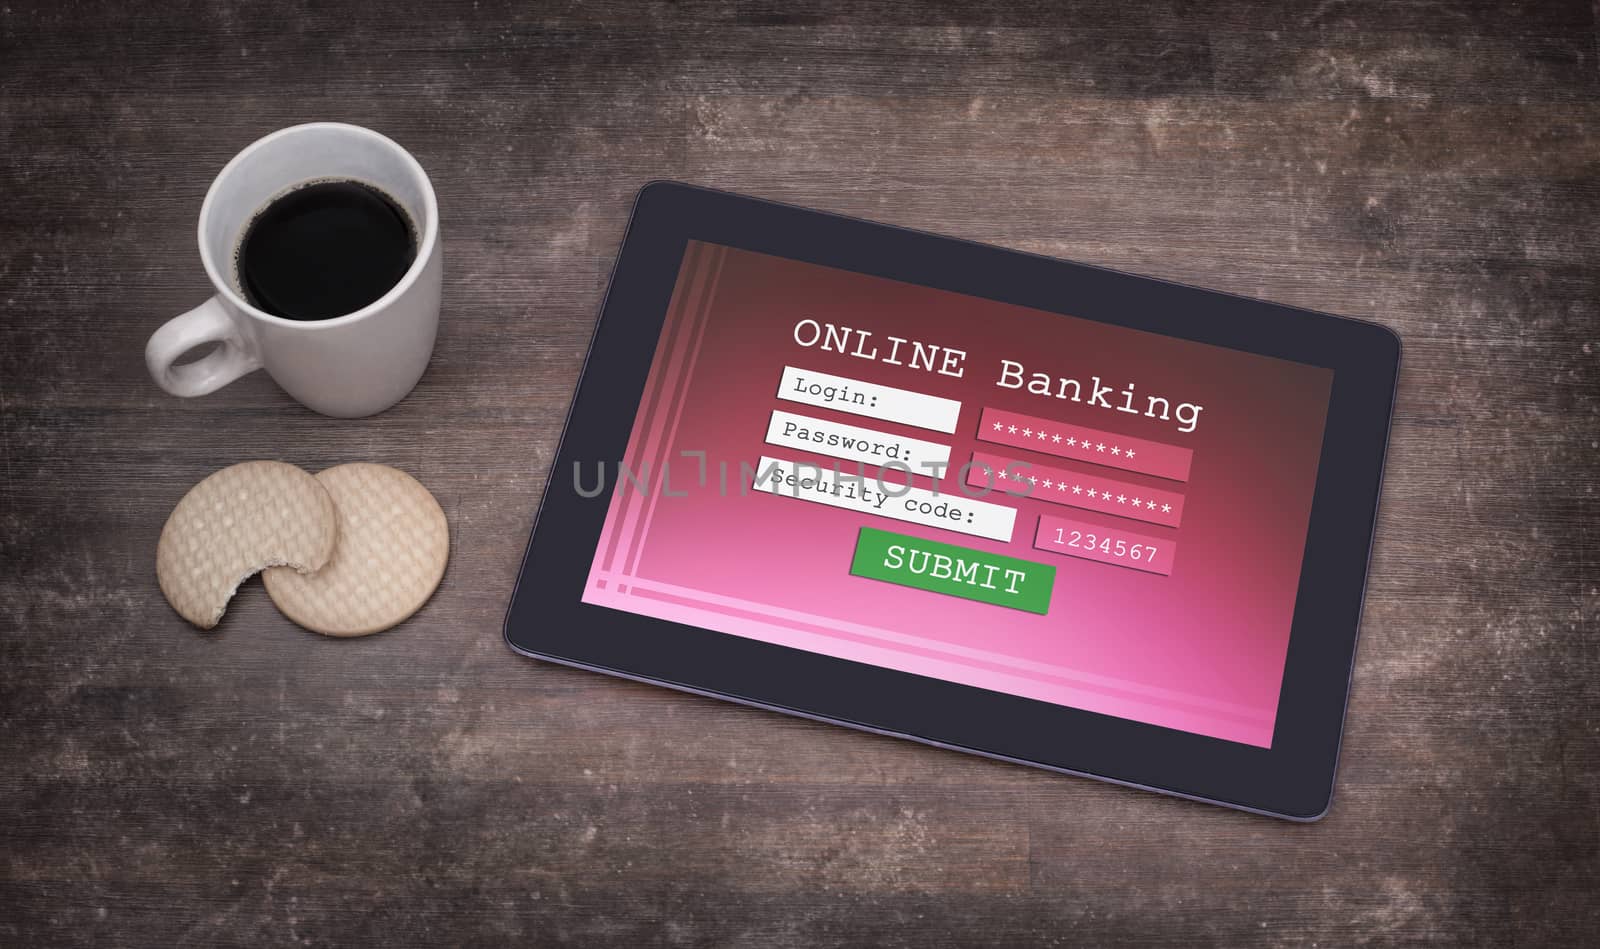 Online banking on a tablet by michaklootwijk